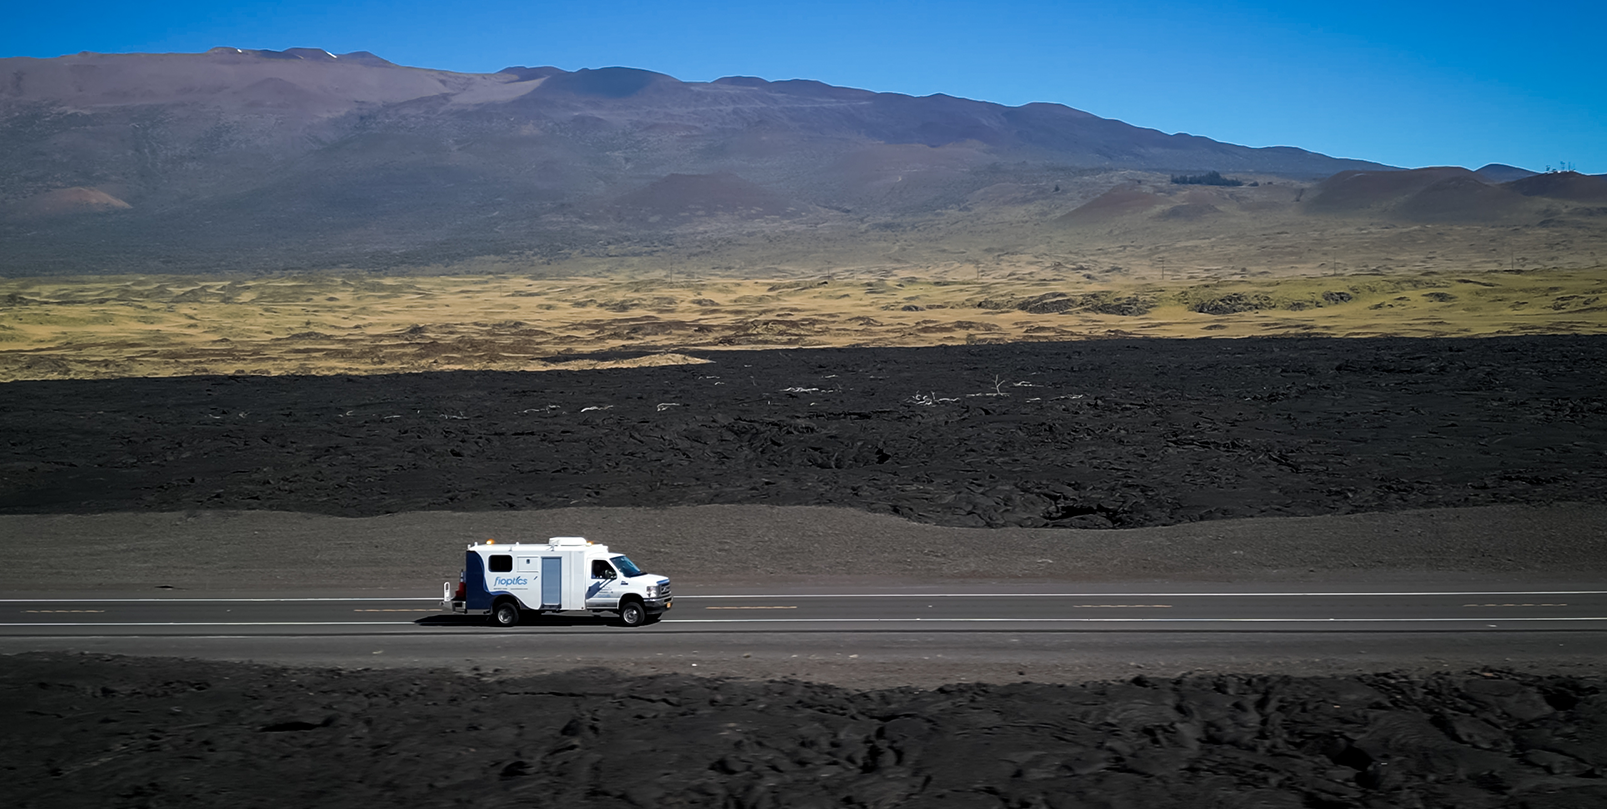 Fioptics van driving across road with remnants of a lava field in foreground and mountain the background.